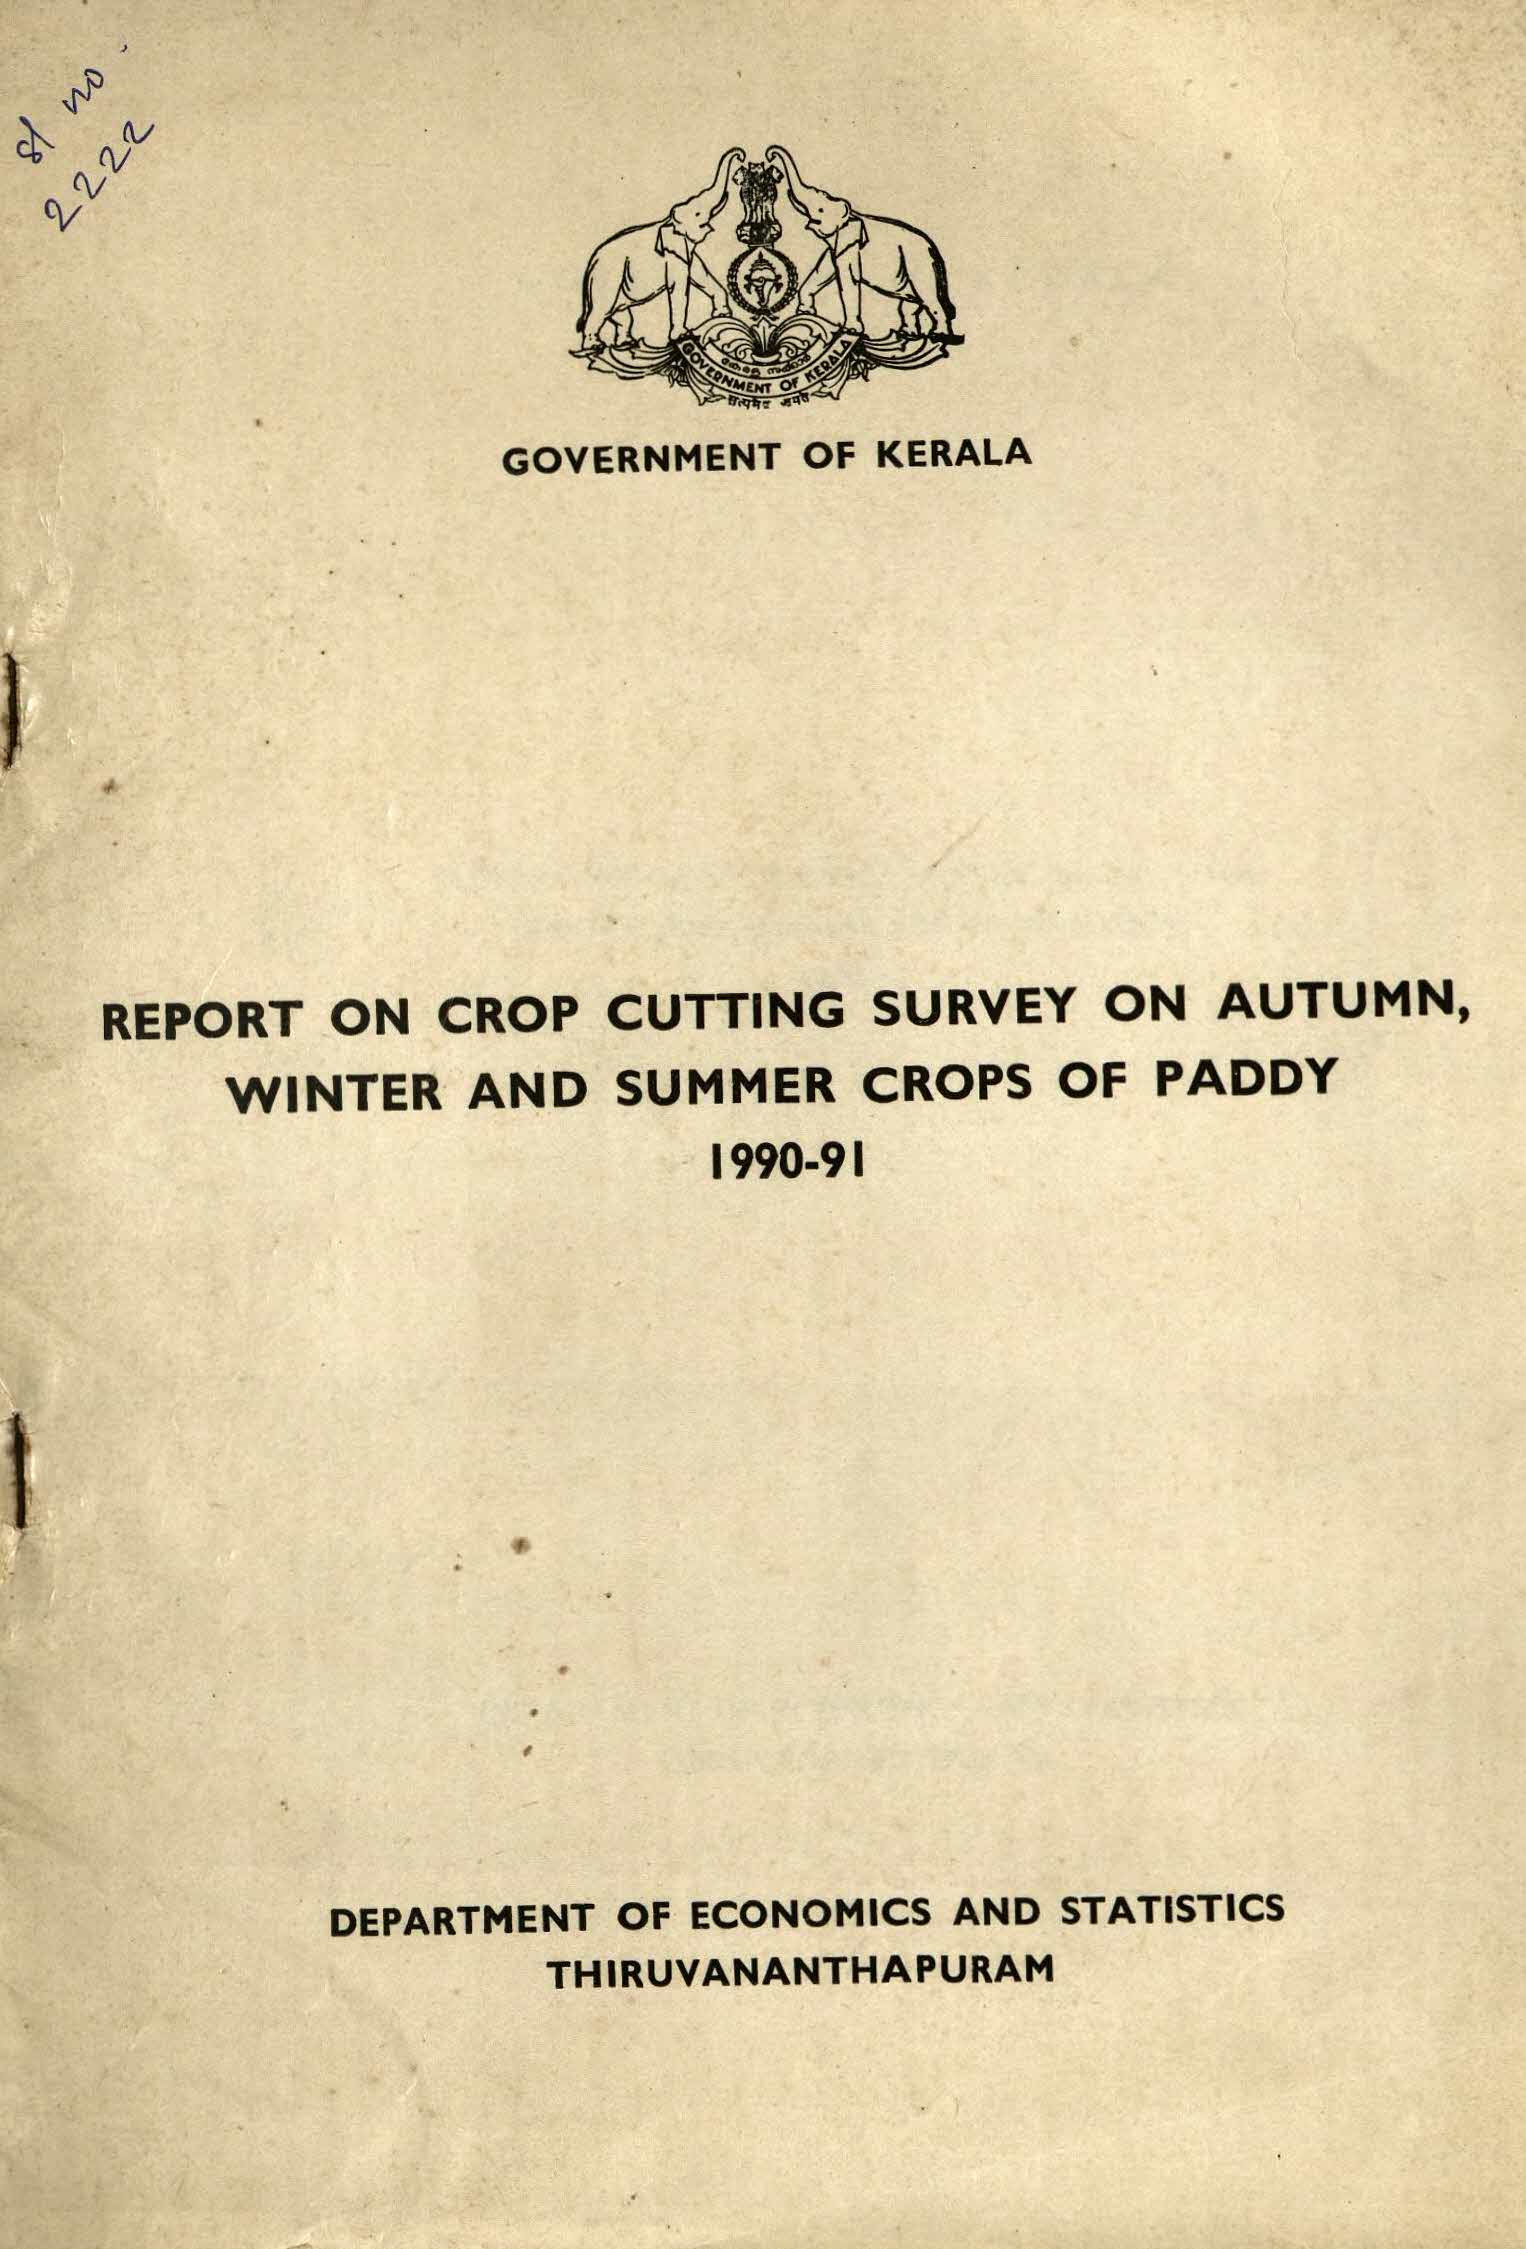 REPORT ON CROP CUTTING SURVEY ON AUTUM,WINTER AND SUMMER CROPS OF PADDY 1990-91